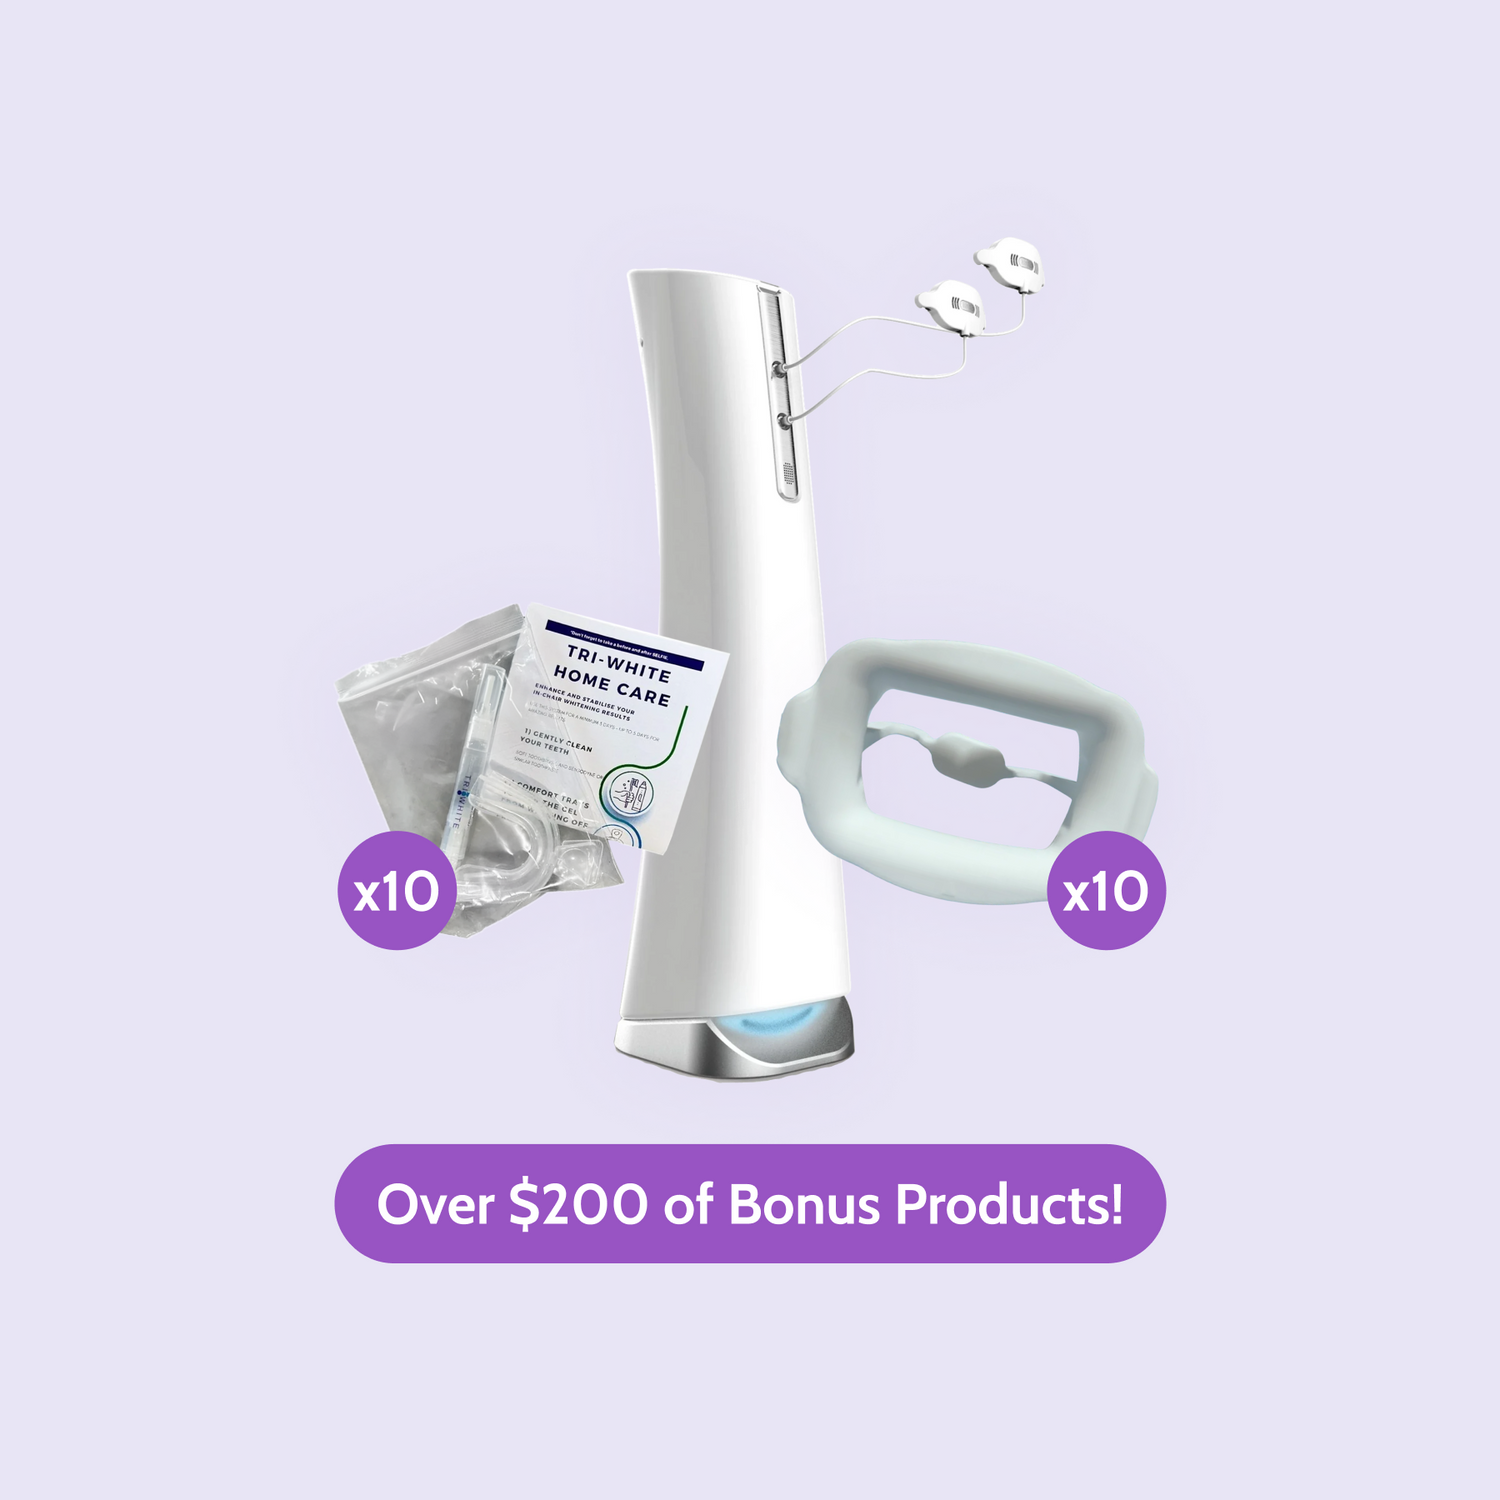 Get $200+ of Bonus products when you purchase the Beyond II ULTRA Whitening Accelerator